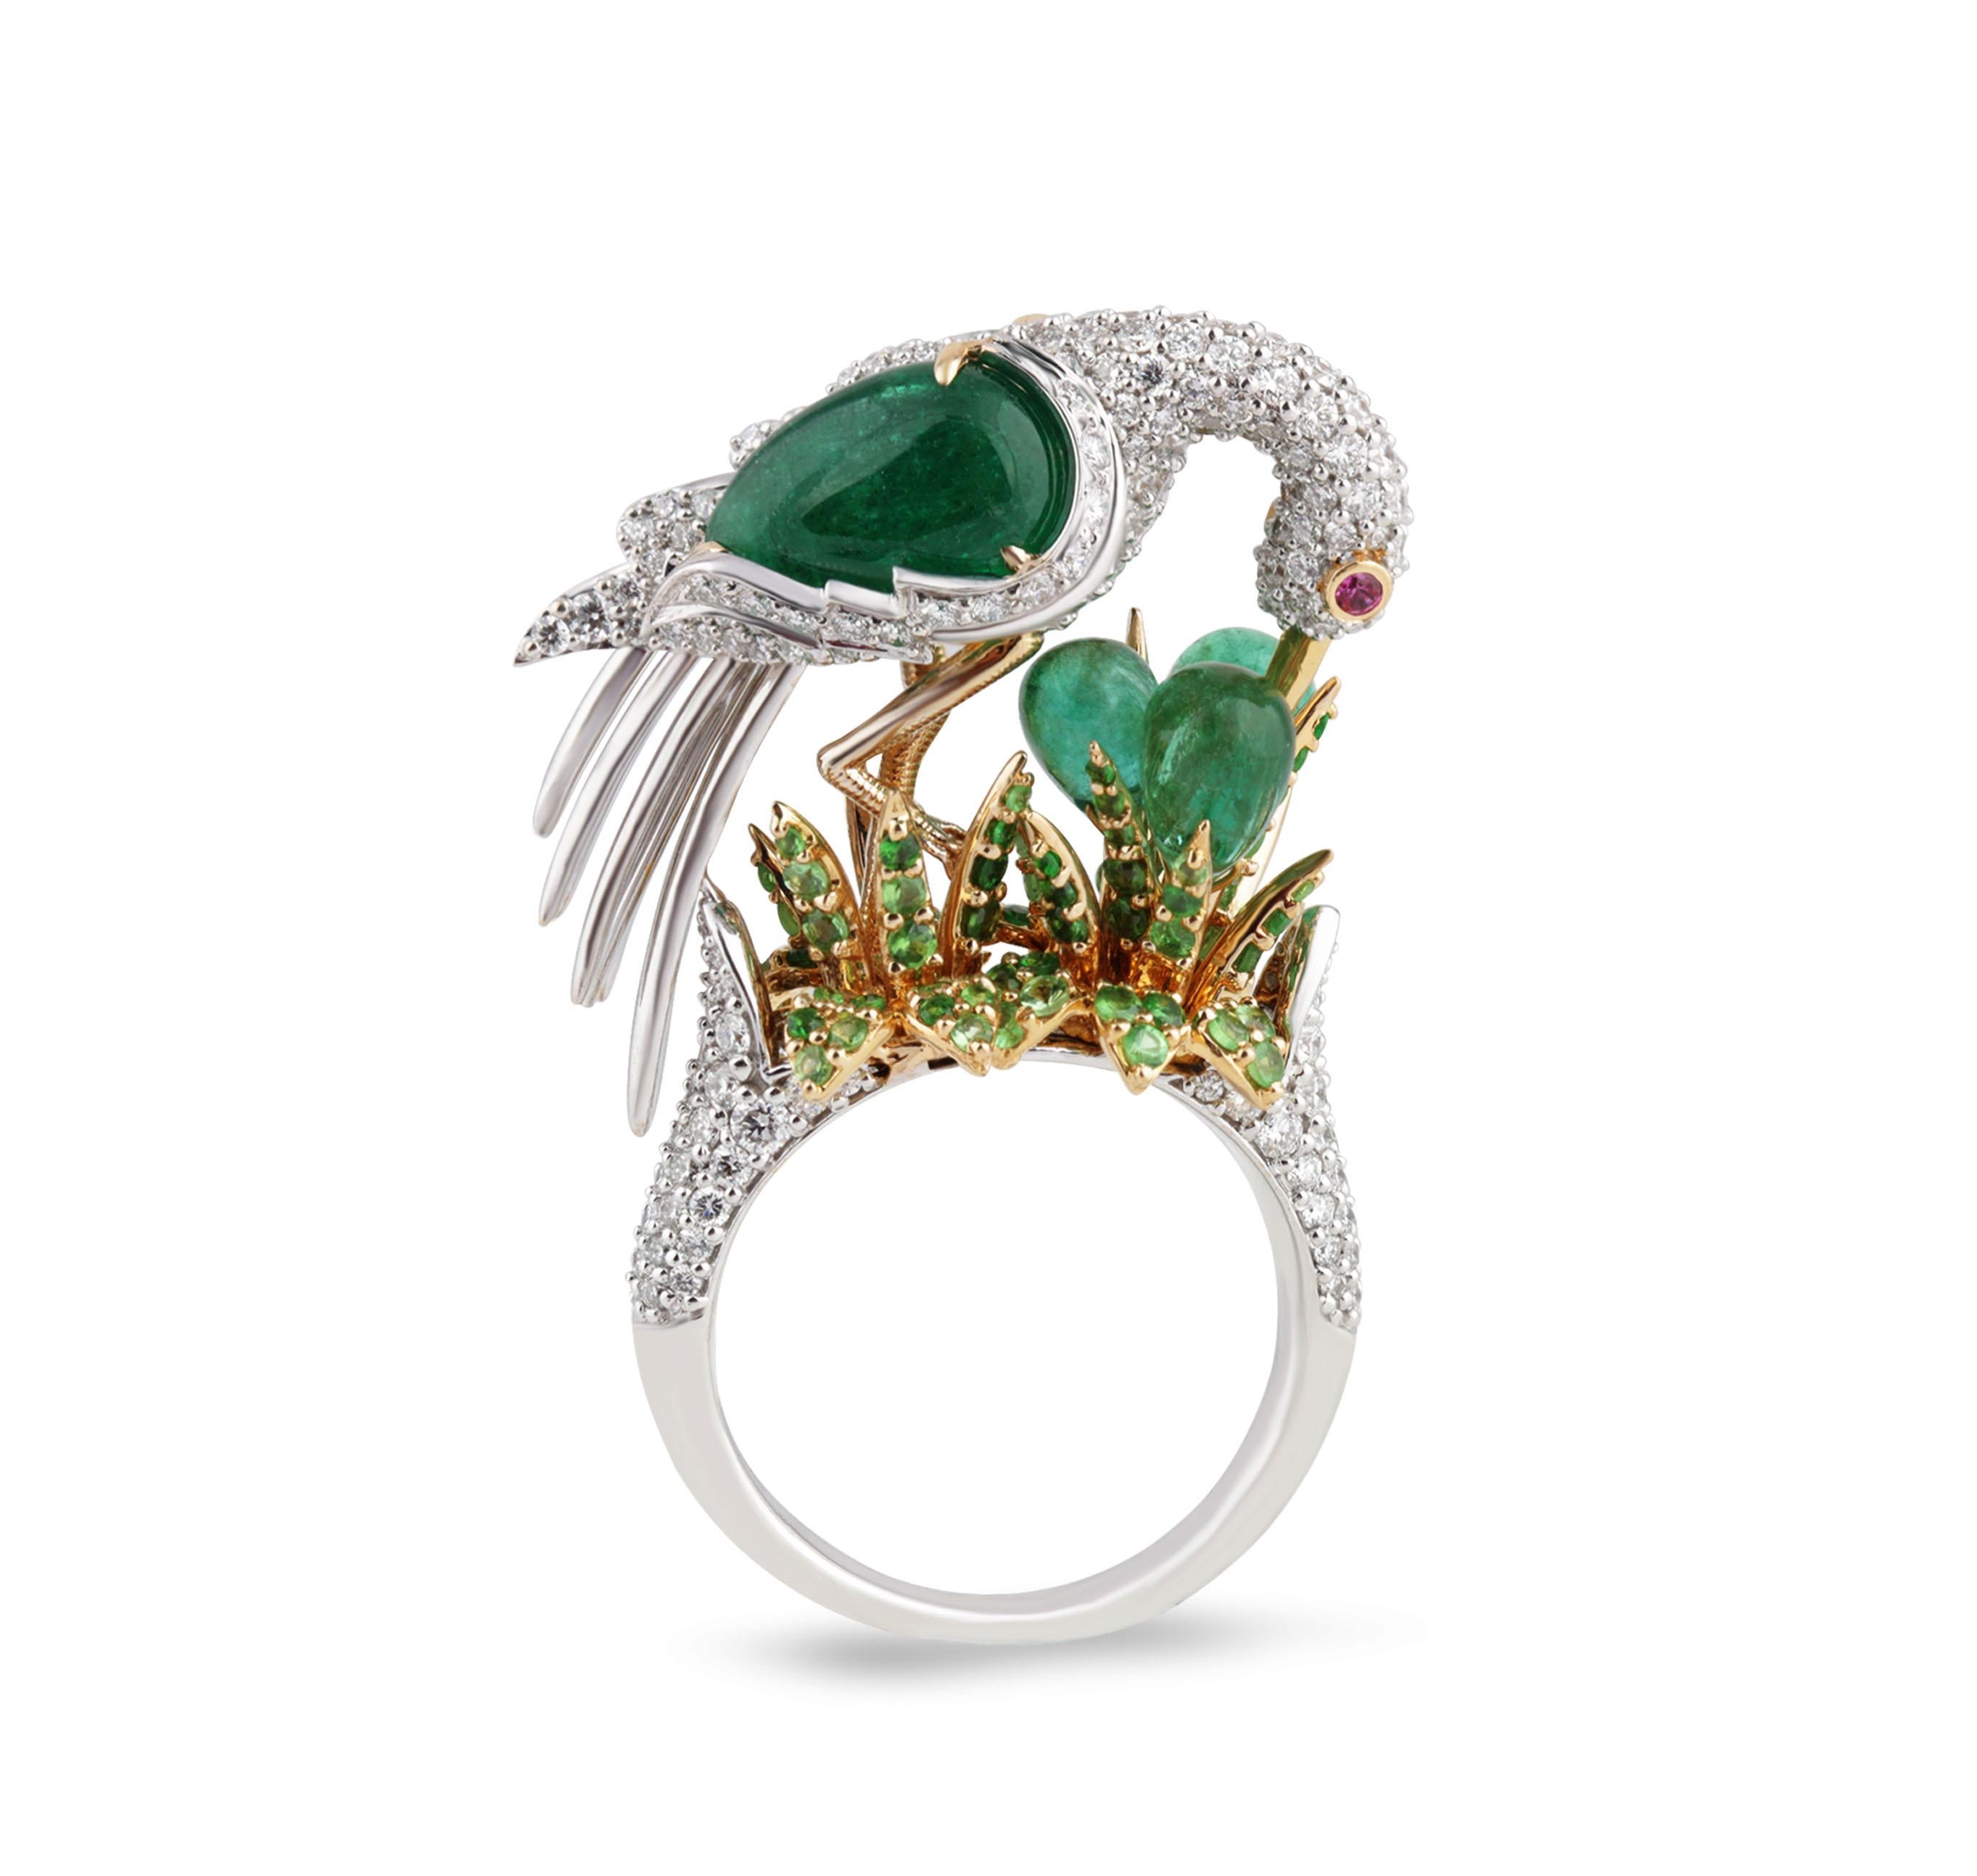 Diamonds, Emeralds, Tsavorites and Pink Sapphire Cocktail Ring

This cocktail ring is all you need to spread your wings as a bonafide style maven, thanks to its decadent crane centerpiece. Handcrafted an 18K white gold base and a bed of handpicked